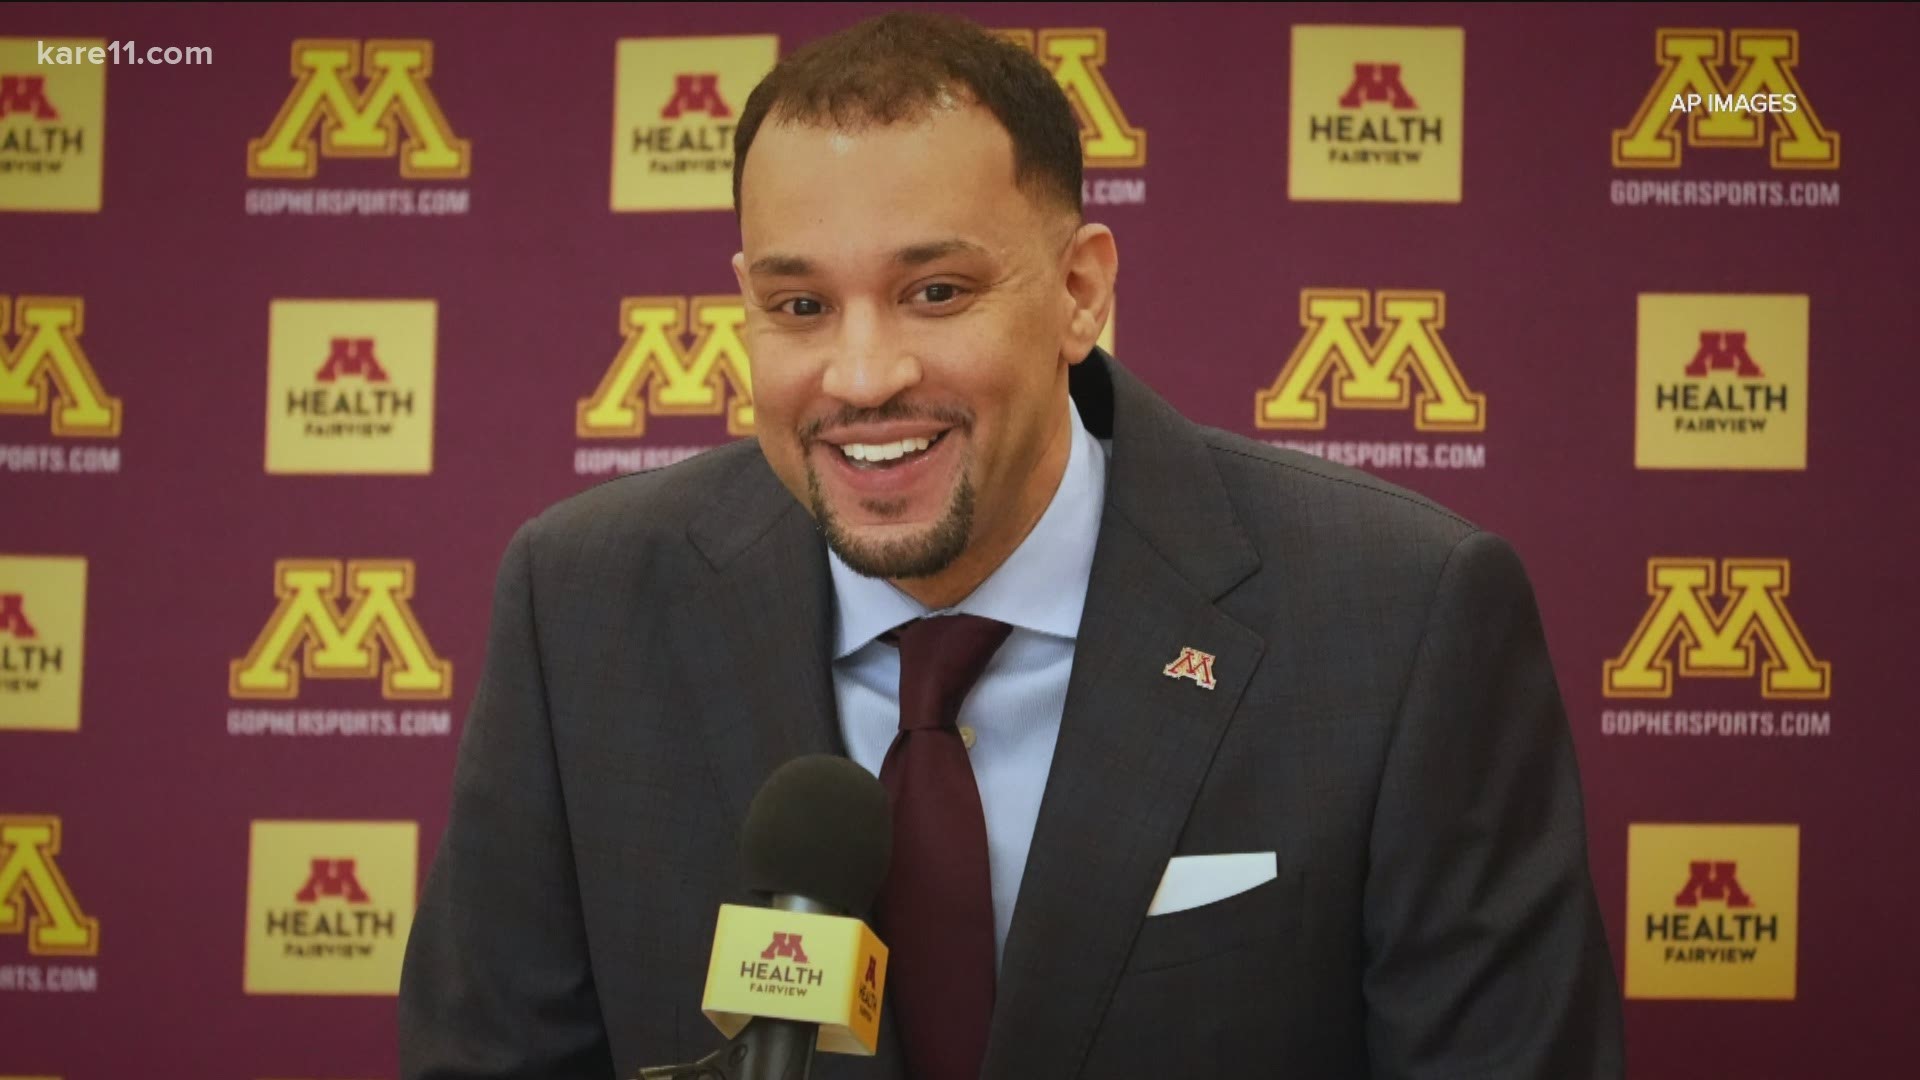 Johnson is a University of Minnesota alumni and was on the Gophers' coaching staff from 2013-18 under previous head coach Richard Pitino before going to Xavier.